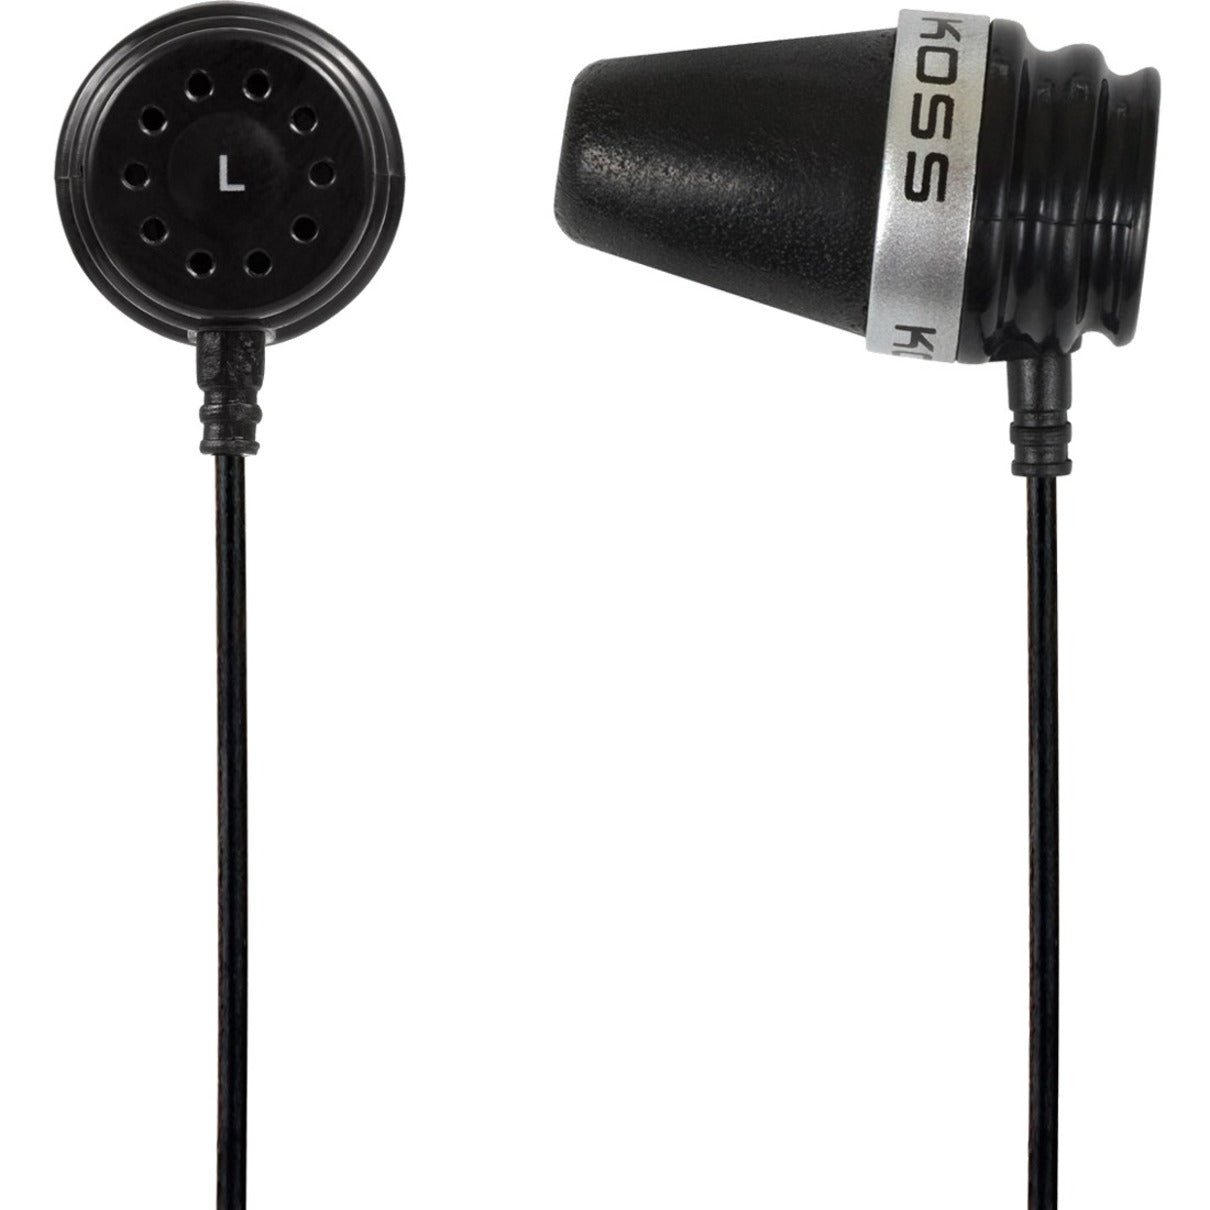 Koss SPARKPLUG VC K Sparkplug Earset, Binaural Earbud, Lifetime Warranty, On-cable Microphone, Ambient Noise, 16 Ohm Impedance, Stereo Sound, 4 ft Cable Length, Wired, 20 kHz Maximum Frequency Response, 10 Hz Minimum Frequency Response, Black, In-ear